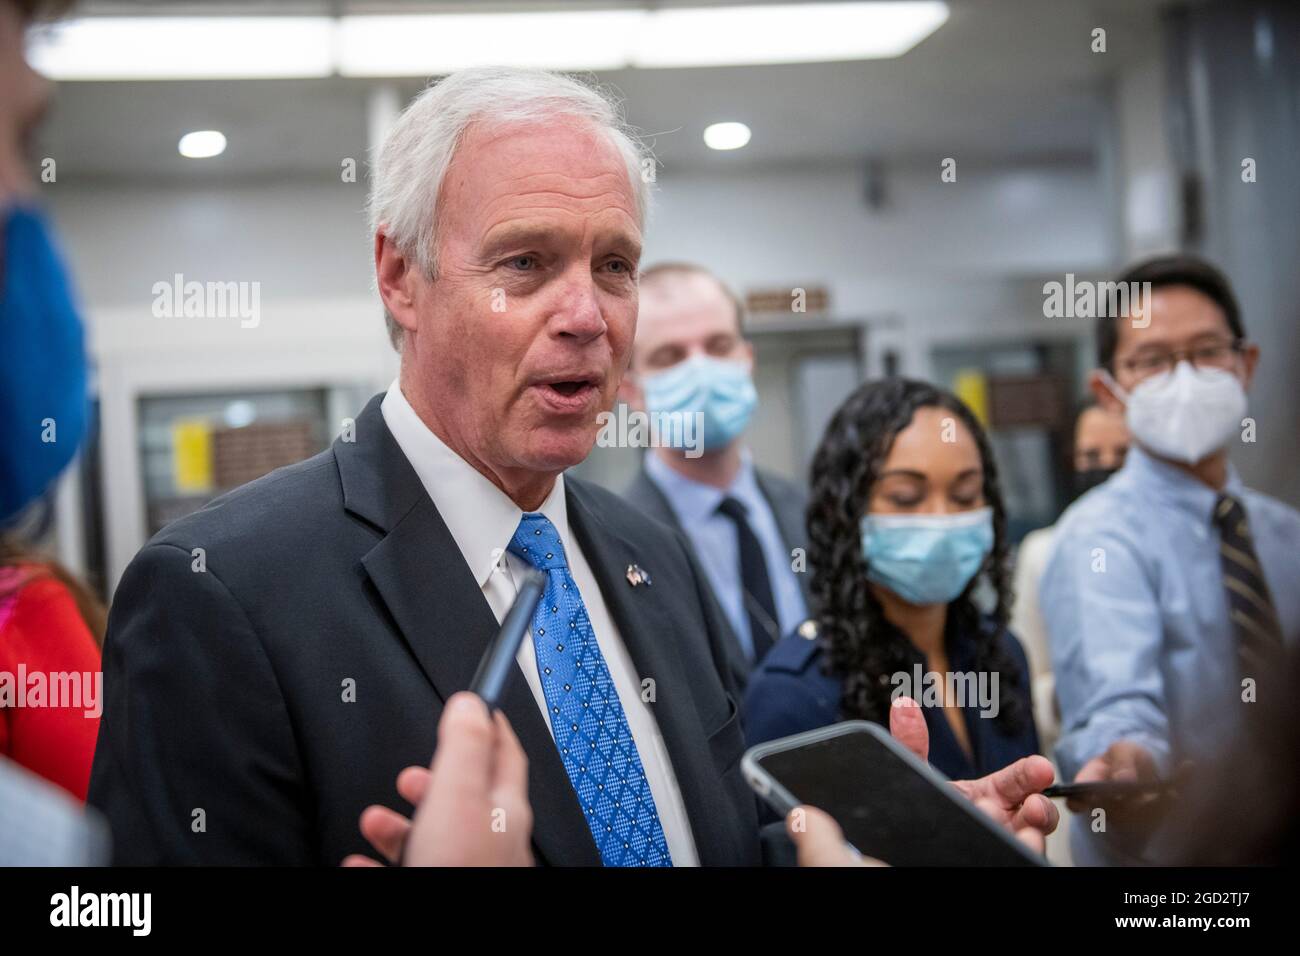 Washington, United States Of America. 10th Aug, 2021. United States Senator Ron Johnson (Republican of Wisconsin) talks with reporters as he walks through the Senate subway during a vote at the US Capitol in Washington, DC, Tuesday, August 10, 2021. The Senate is expected to vote today on final passage of the bipartisan $1 trillion H.R. 3684, Infrastructure Investment and Jobs Act. the Credit: Rod Lamkey/CNP/Sipa USA Credit: Sipa USA/Alamy Live News Stock Photo